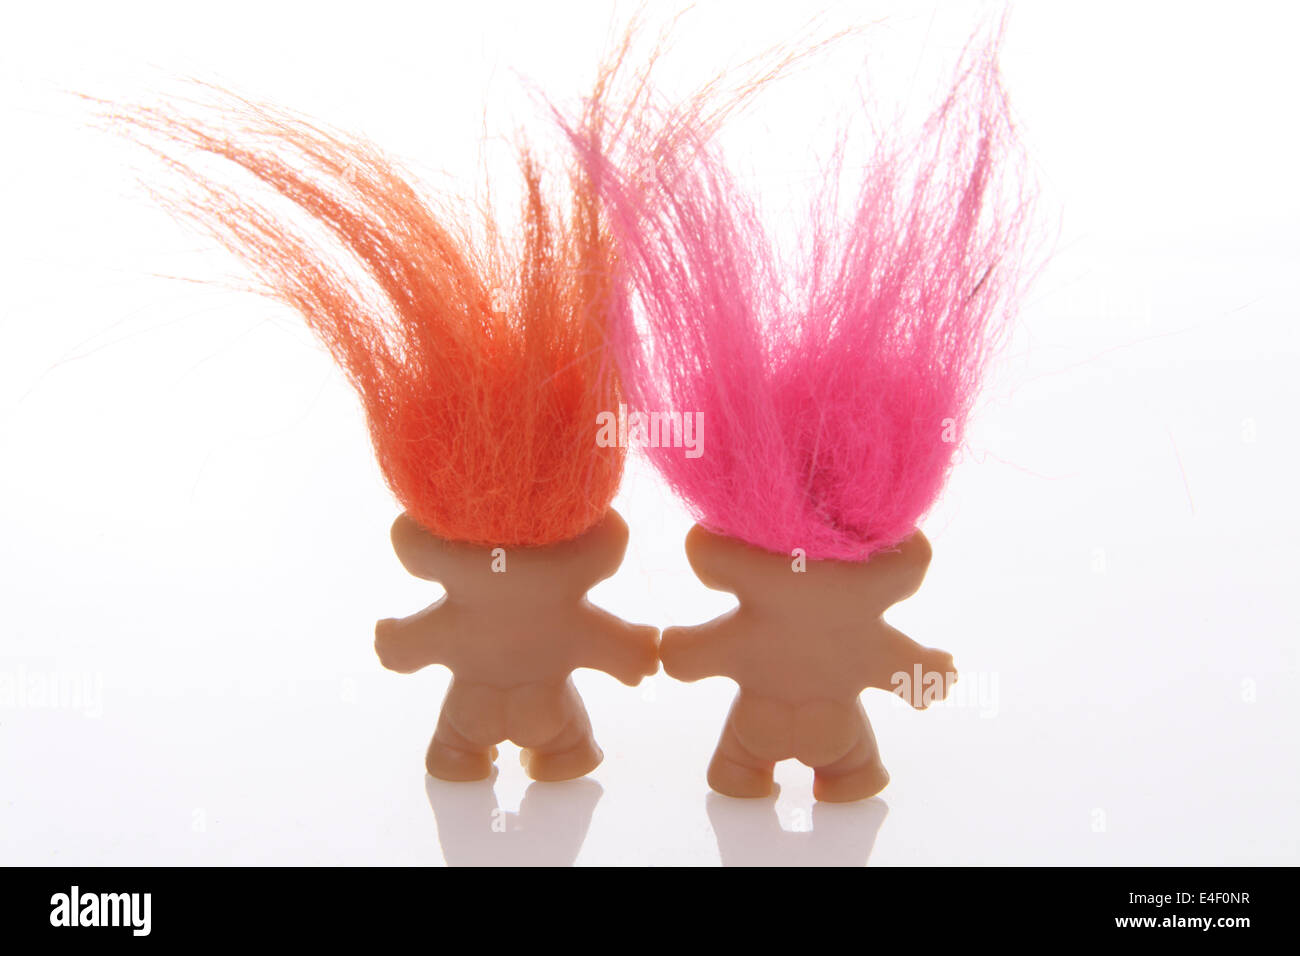 Two Toy Troll Dolls Stock Photo